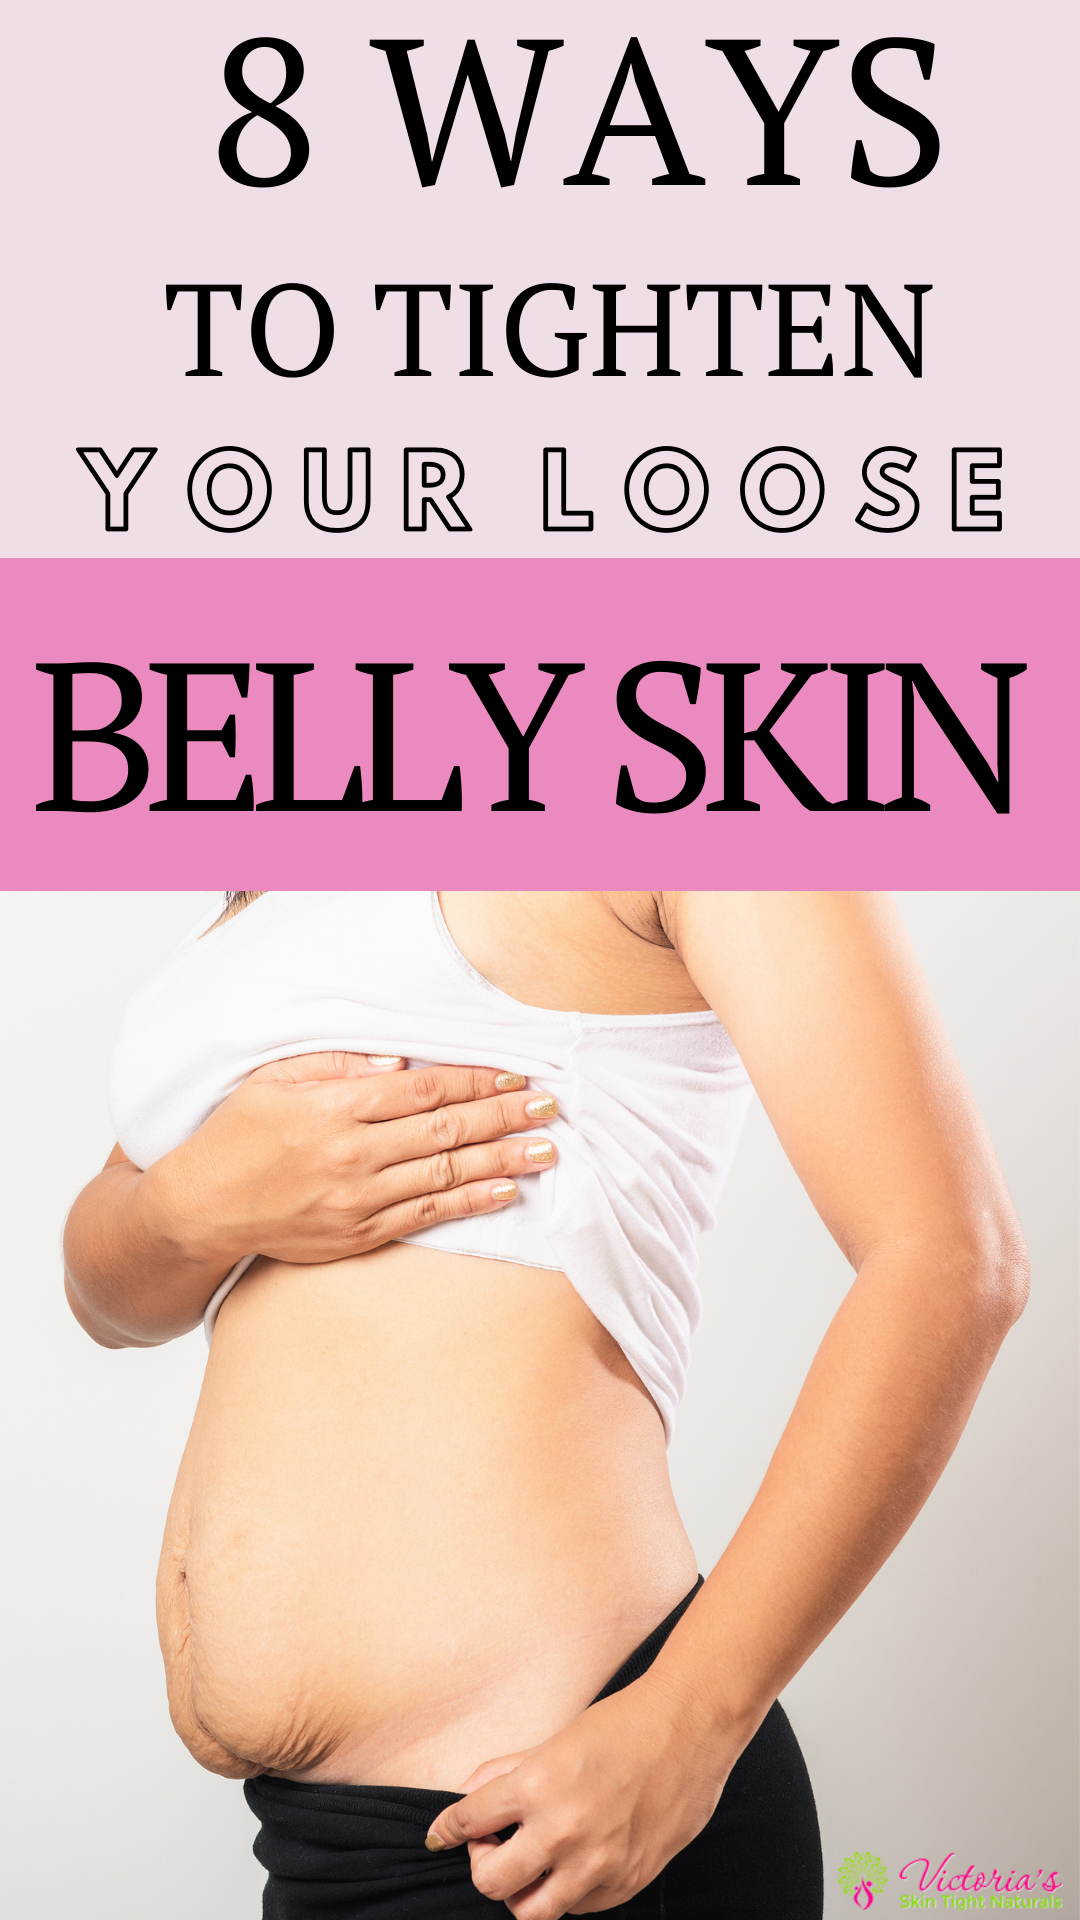 How To Finally Tighten Loose Belly Skin